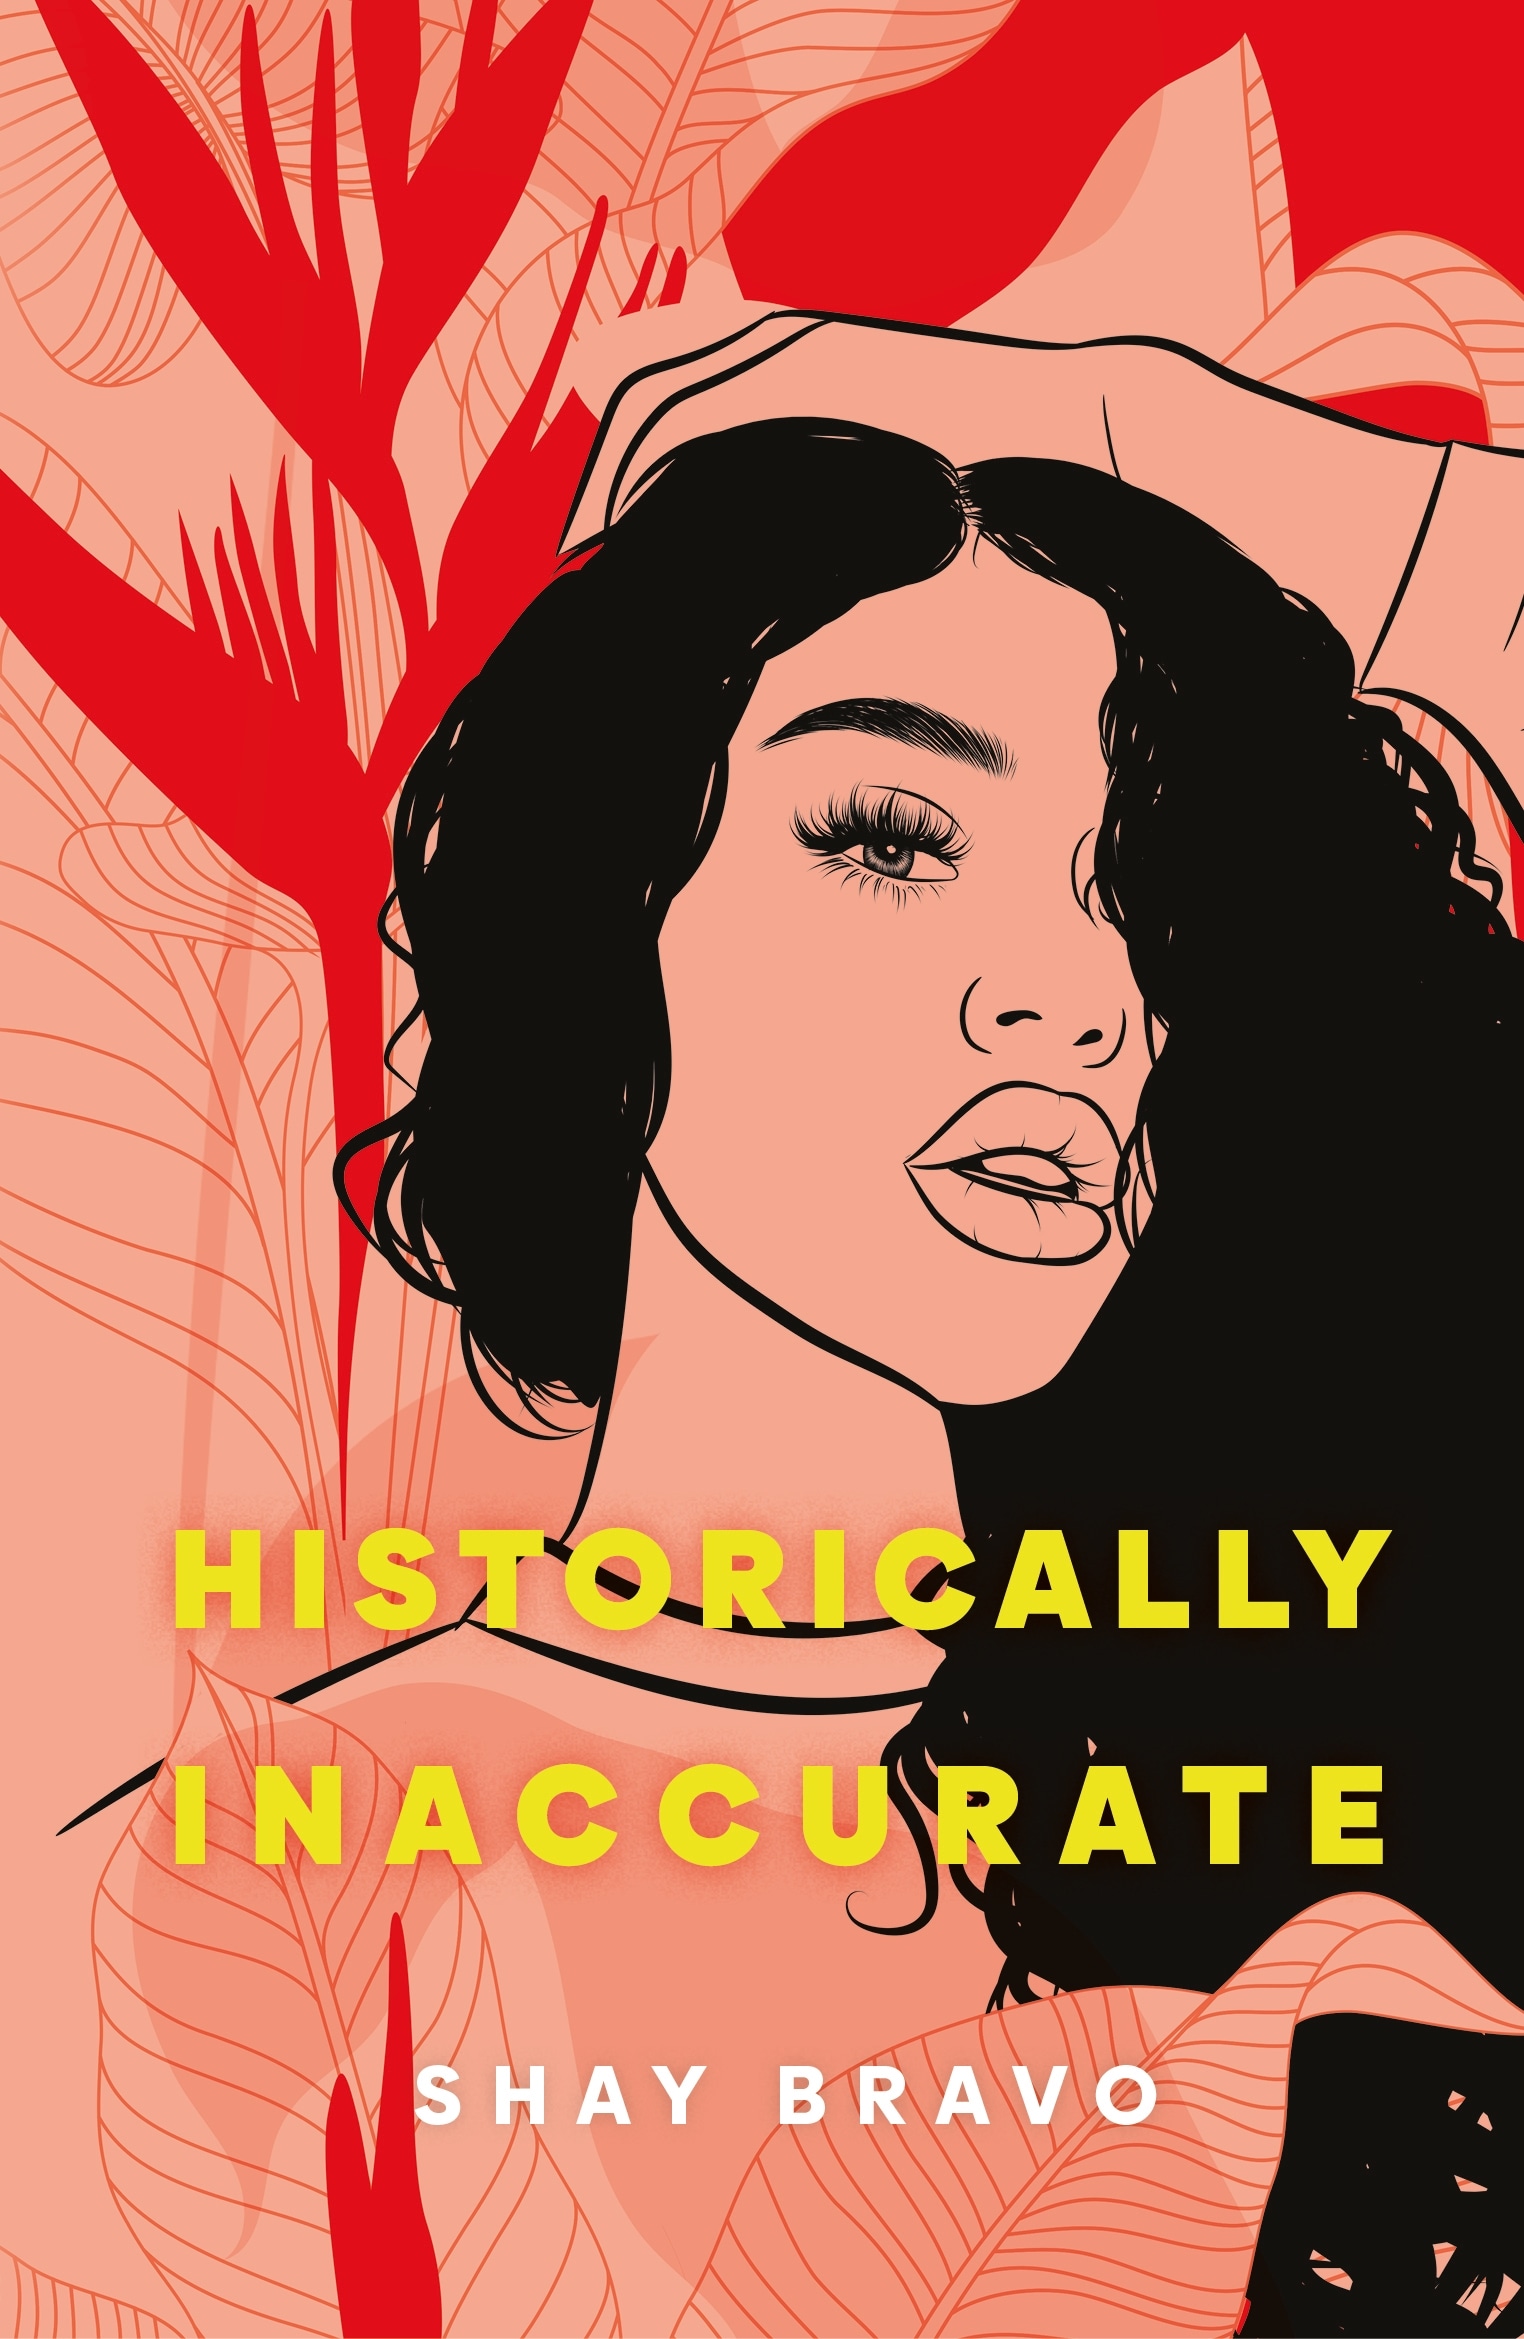 Book “Historically Inaccurate” by Shay Bravo — November 5, 2020